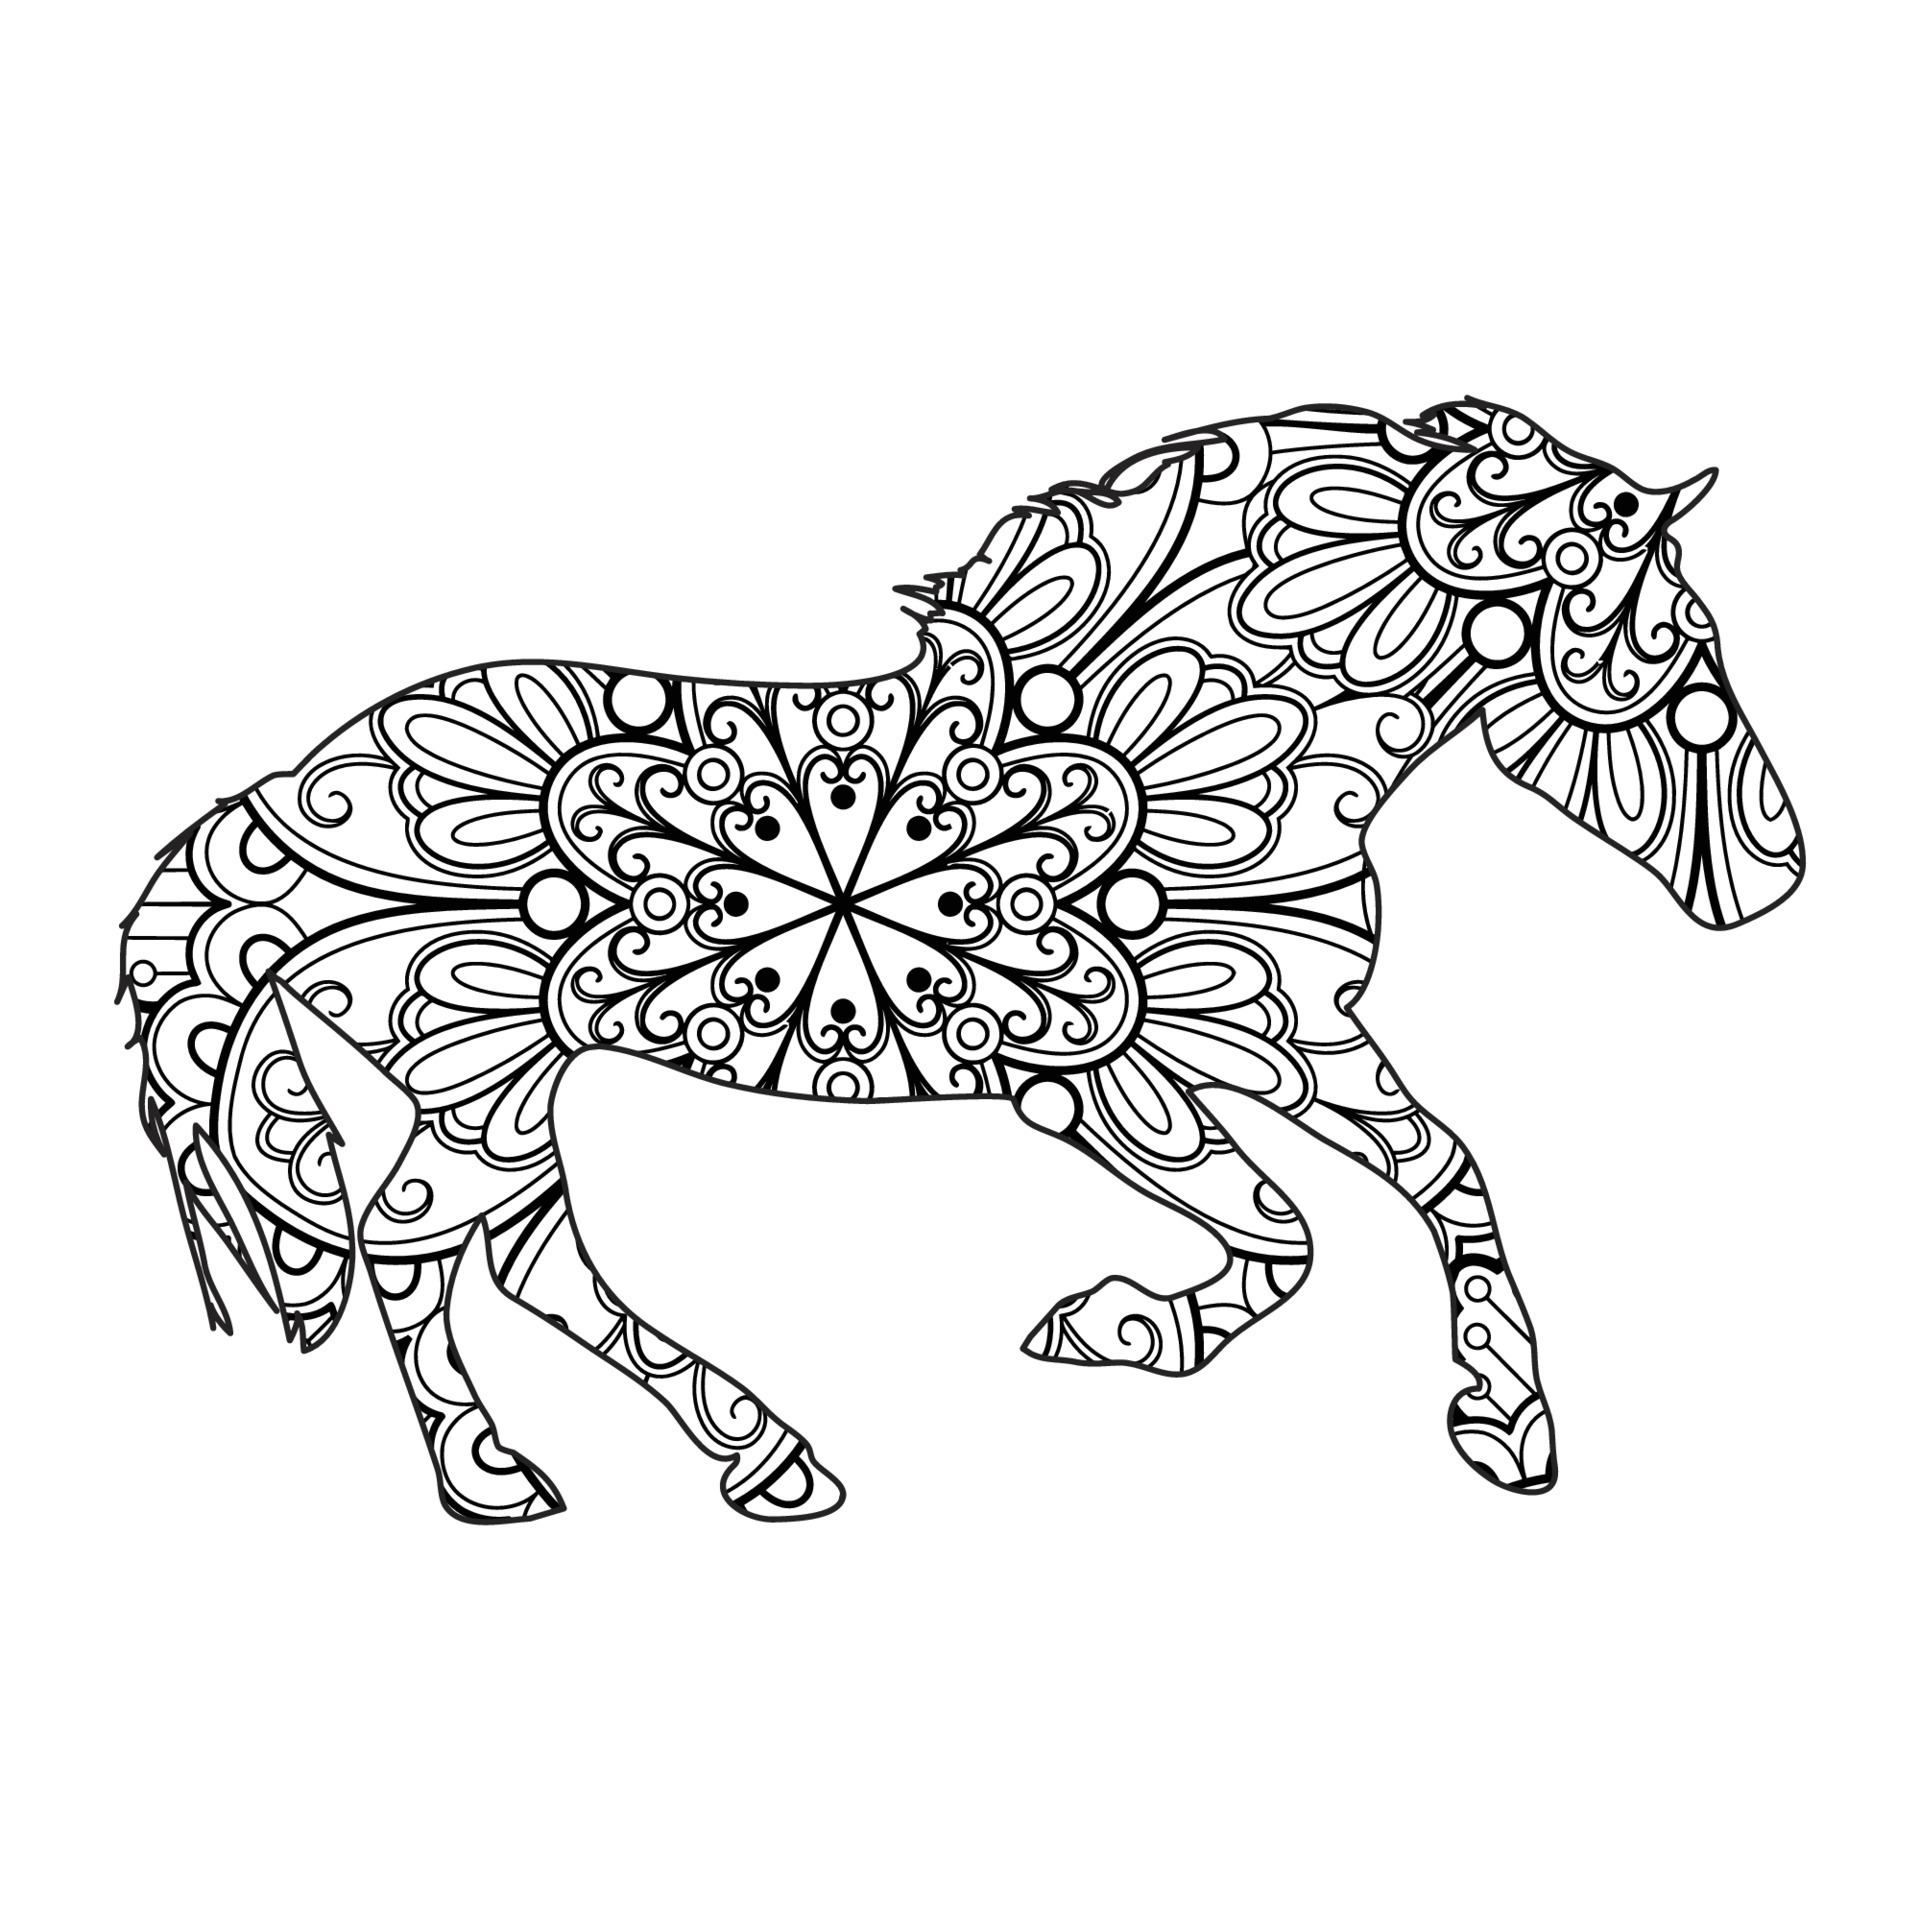 Horse mandala coloring page for kids and adults, animal mandala vector line  art design style illustration. 11026162 Vector Art at Vecteezy